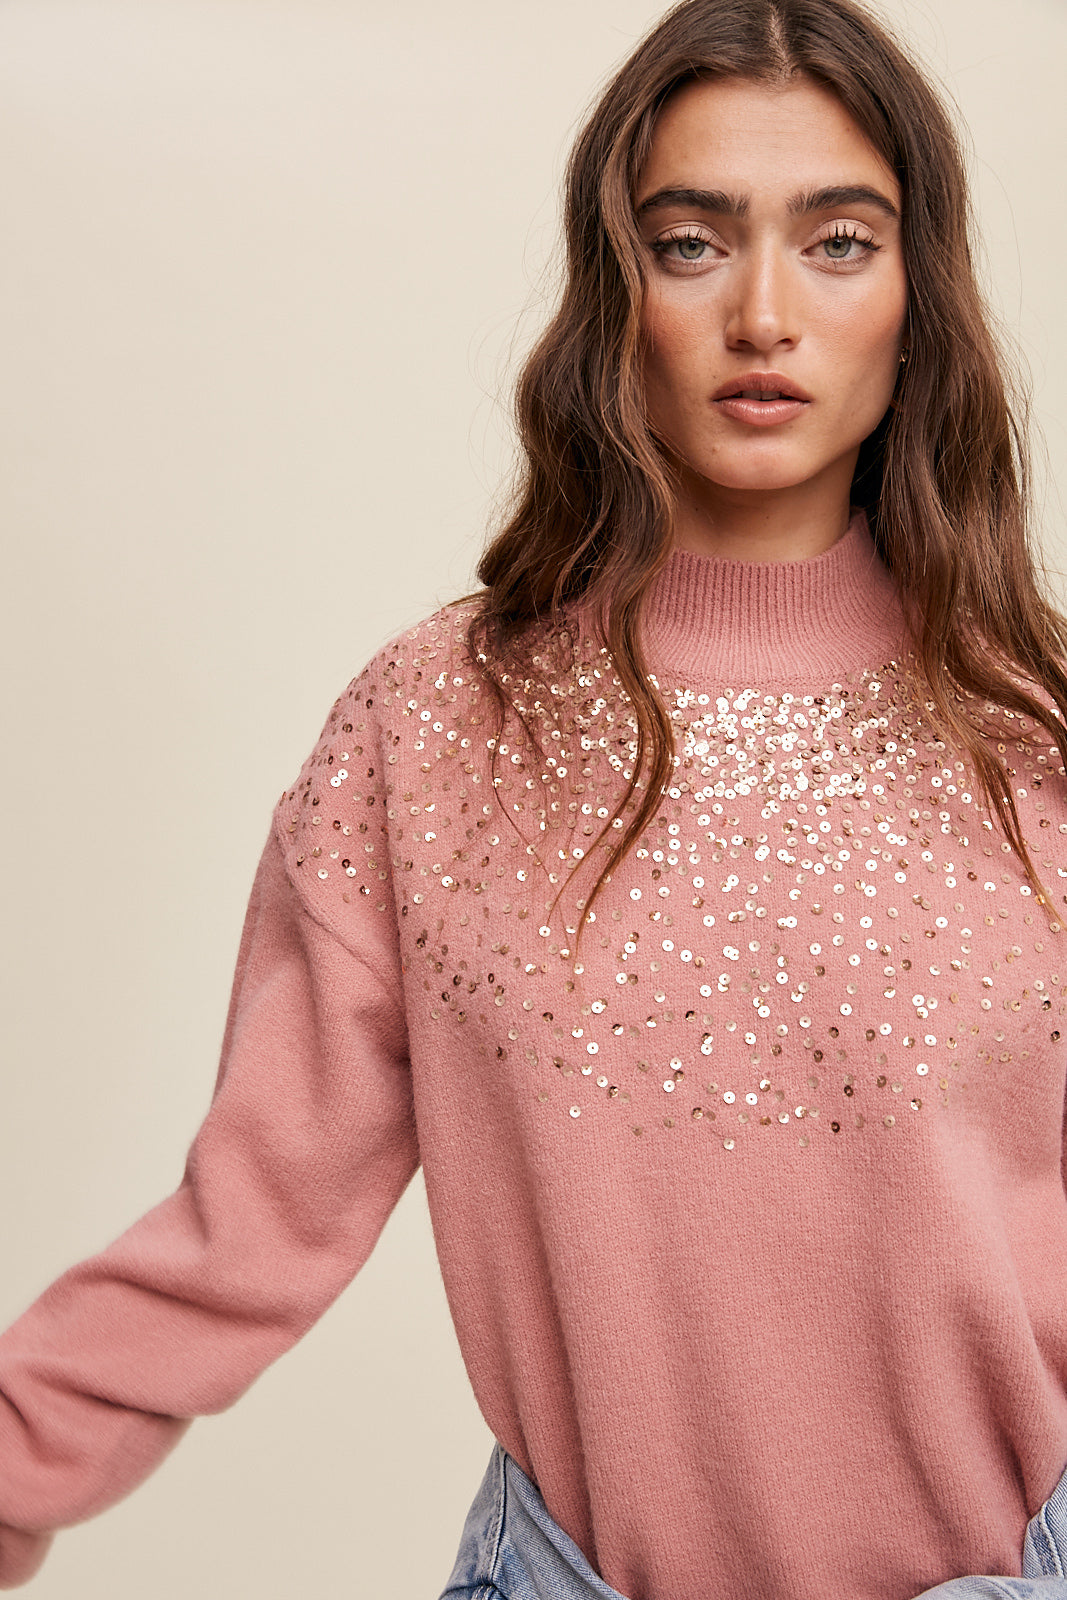 Sprinkled Sequin Sweater - Terracotta-Sweater- Hometown Style HTS, women's in store and online boutique located in Ingersoll, Ontario